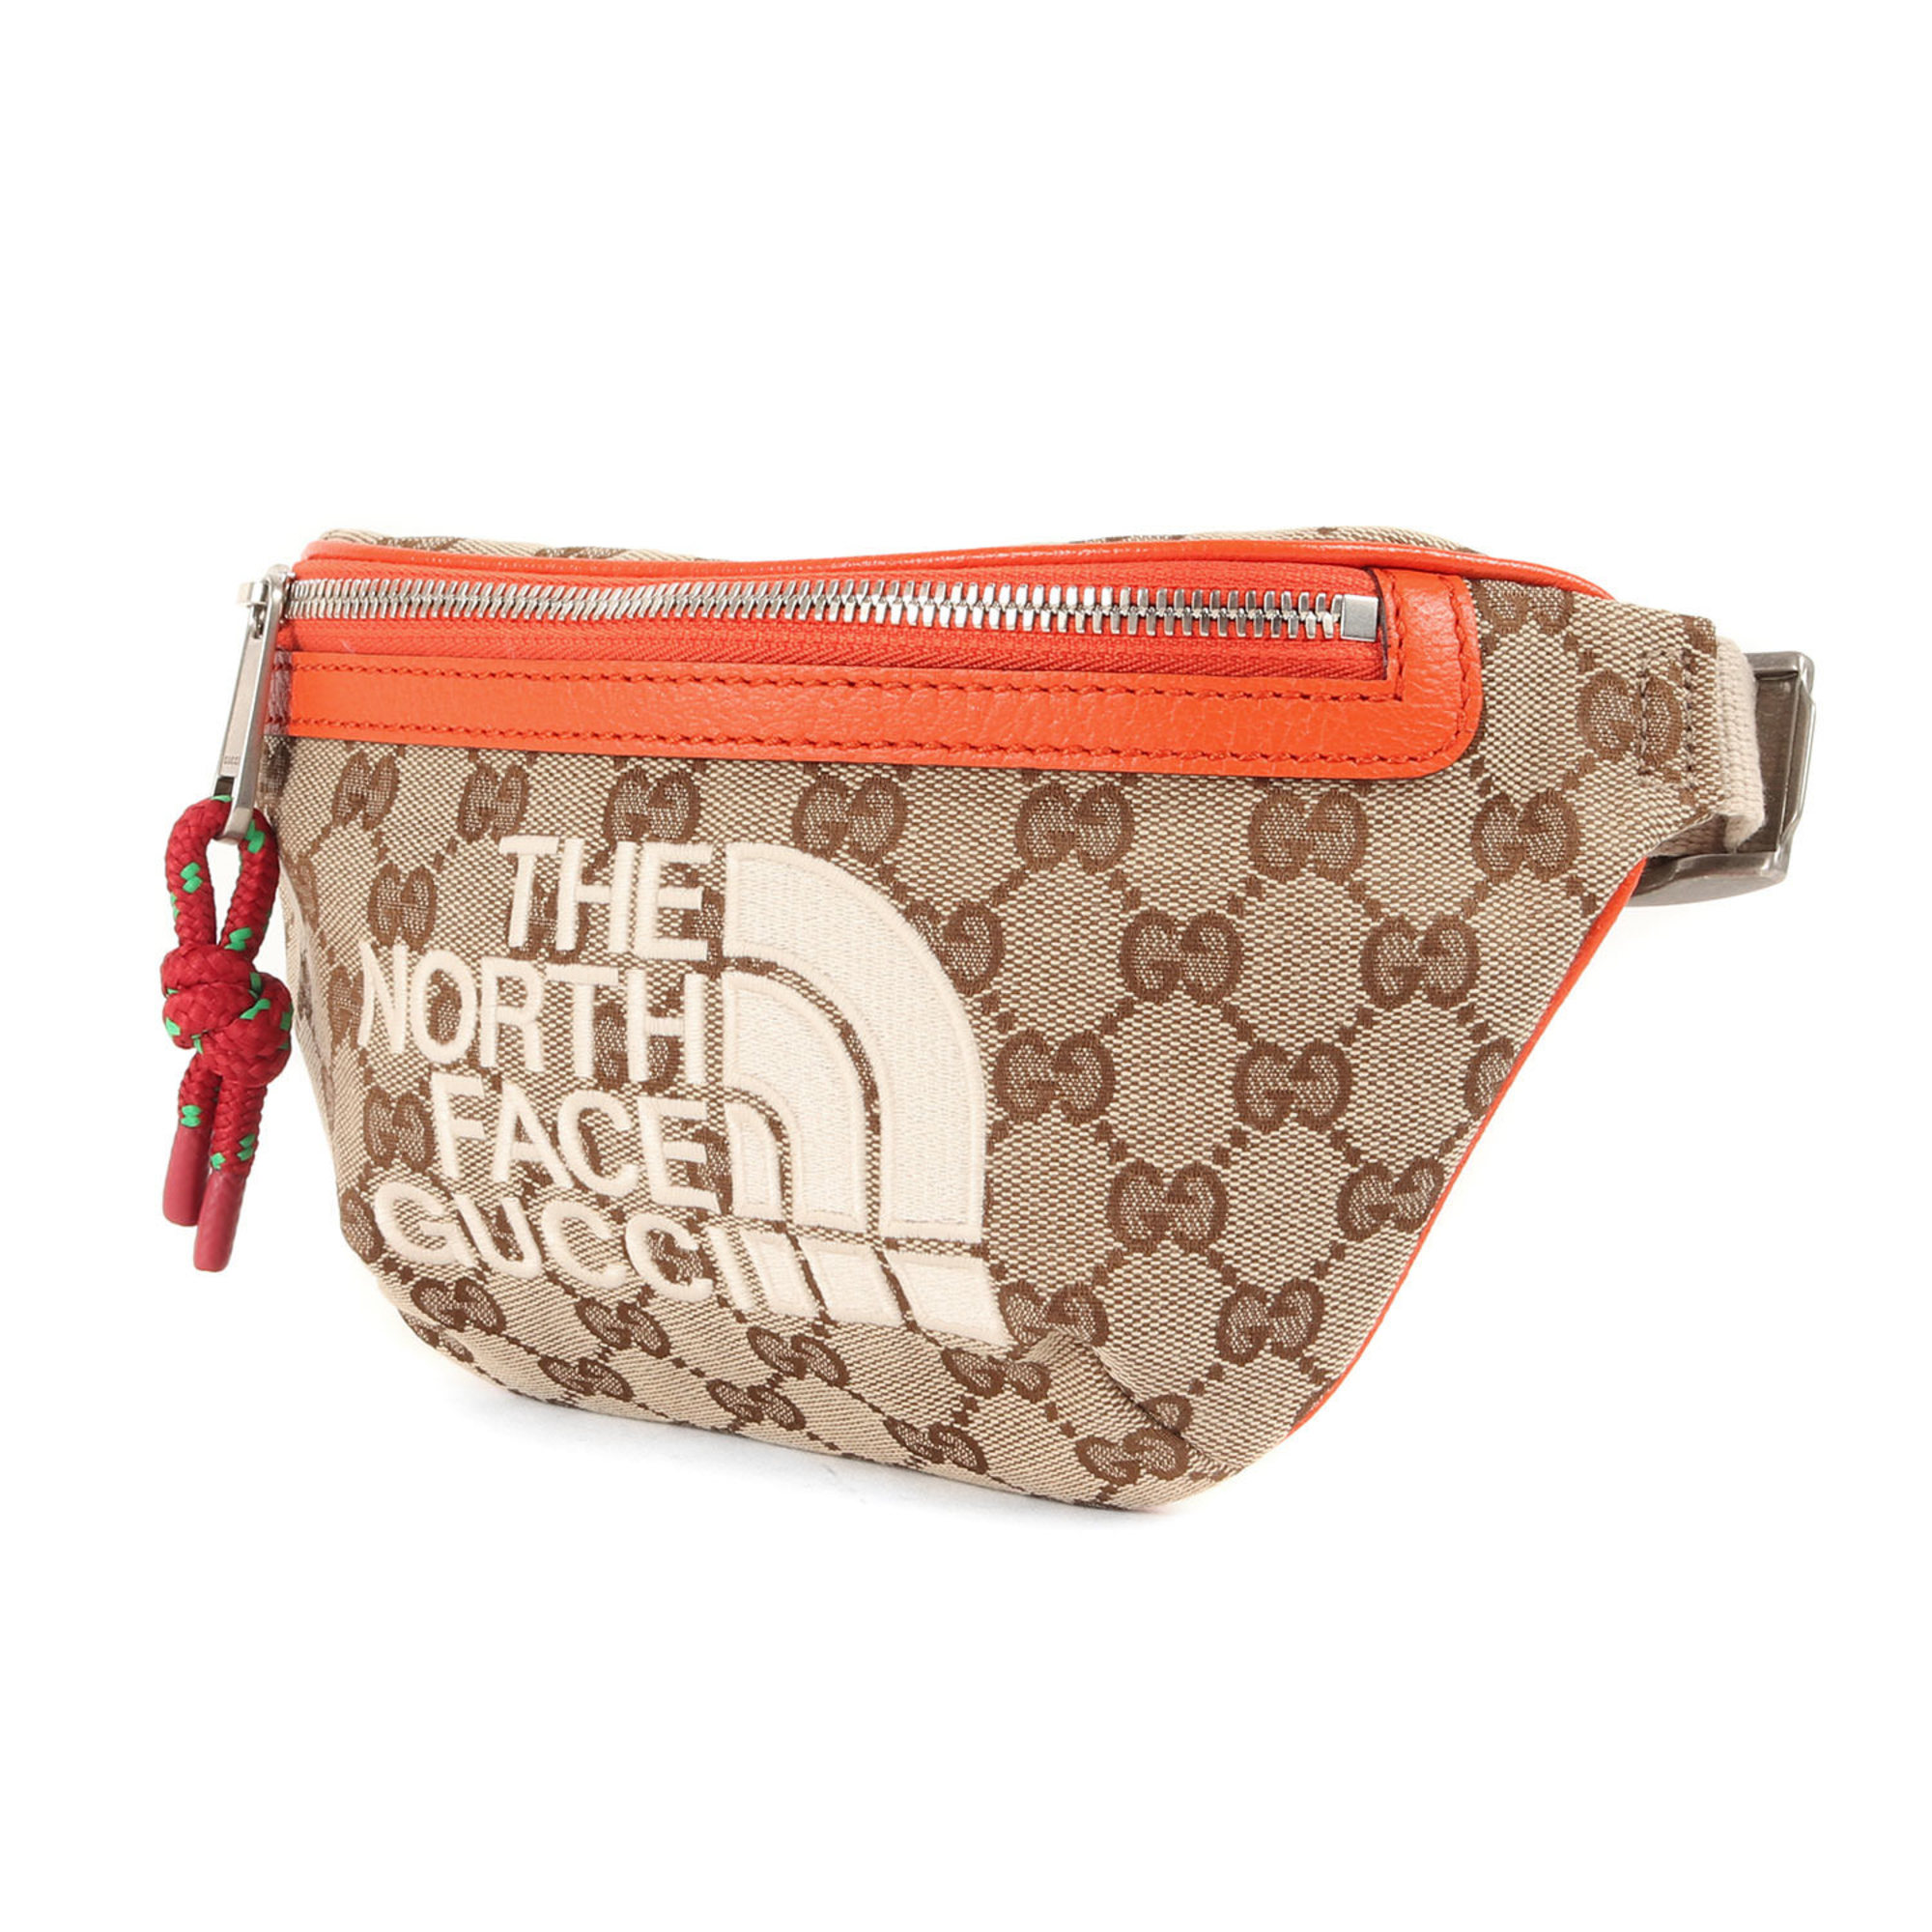 GUCCI Gucci Bag 21AW THE NORTH FACE North Face GG Canvas Belt 650299 Waist Pouch Body Logo Embroidery Beige Orange Collaboration Made in Italy